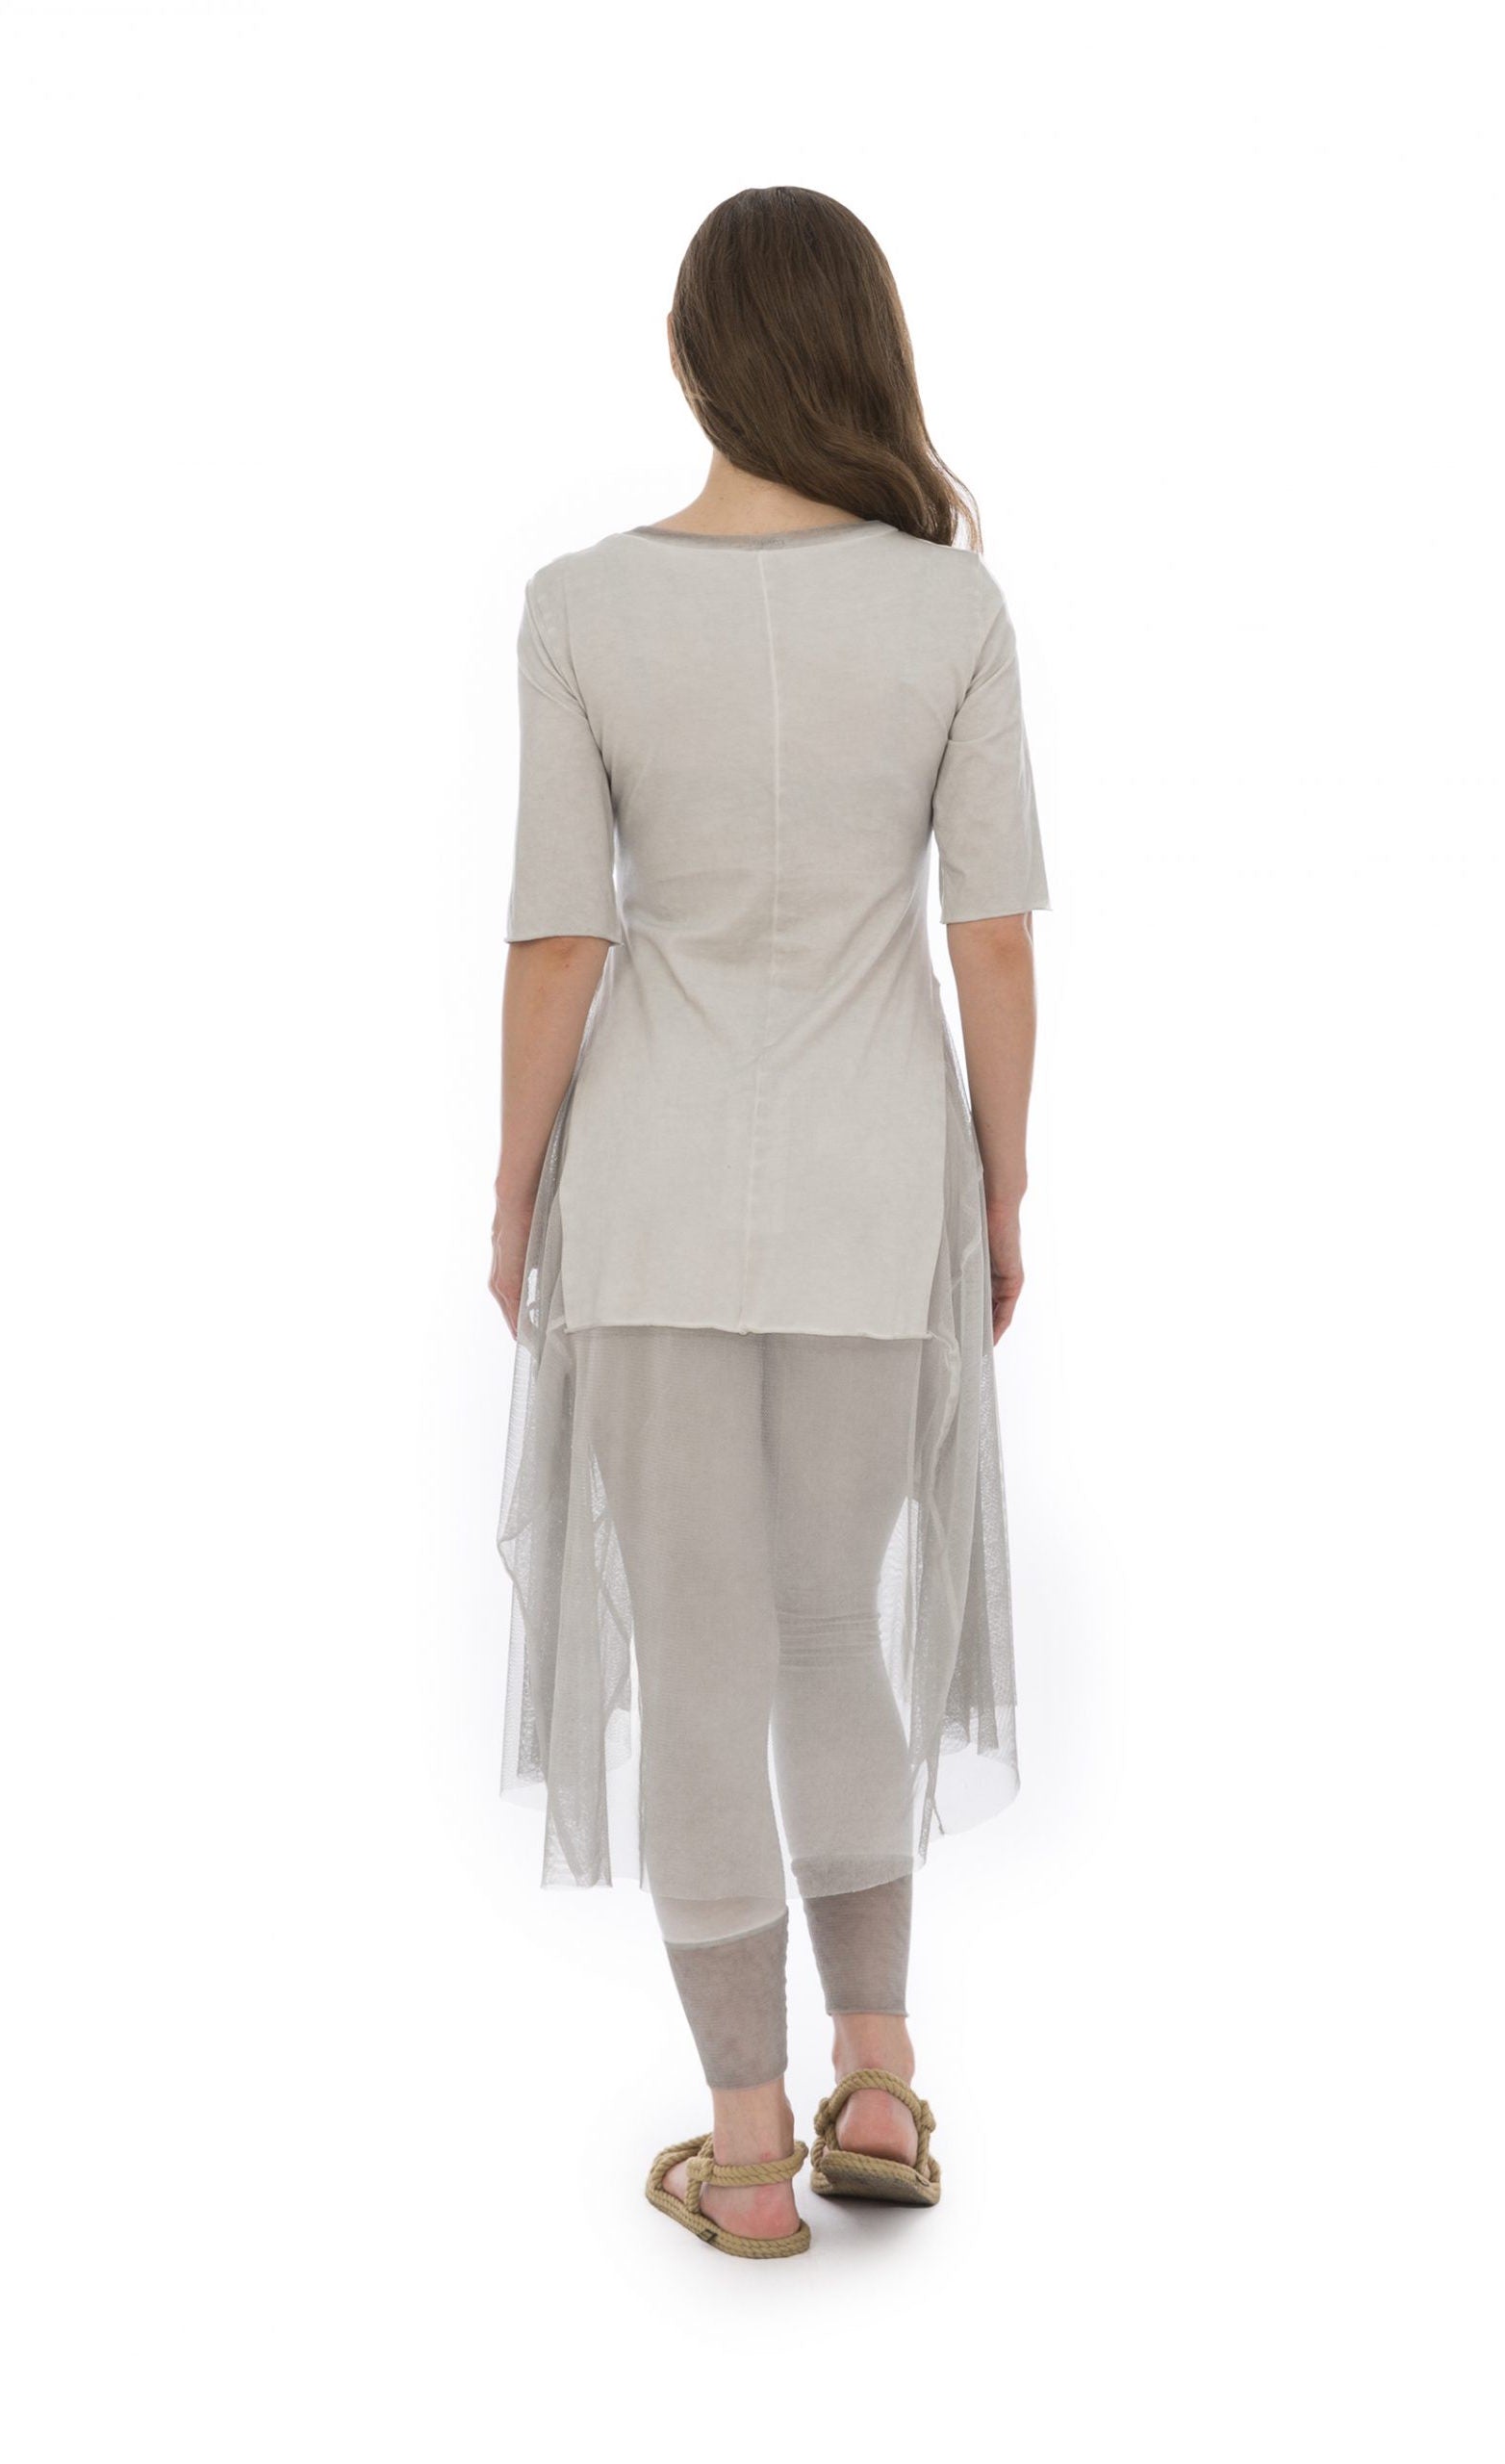 Back full body view of a woman wearing the luukaa stone leggings in the color beige. They have mesh trim on the bottom. On the top the model is wearing the luukaa tunic in beige.